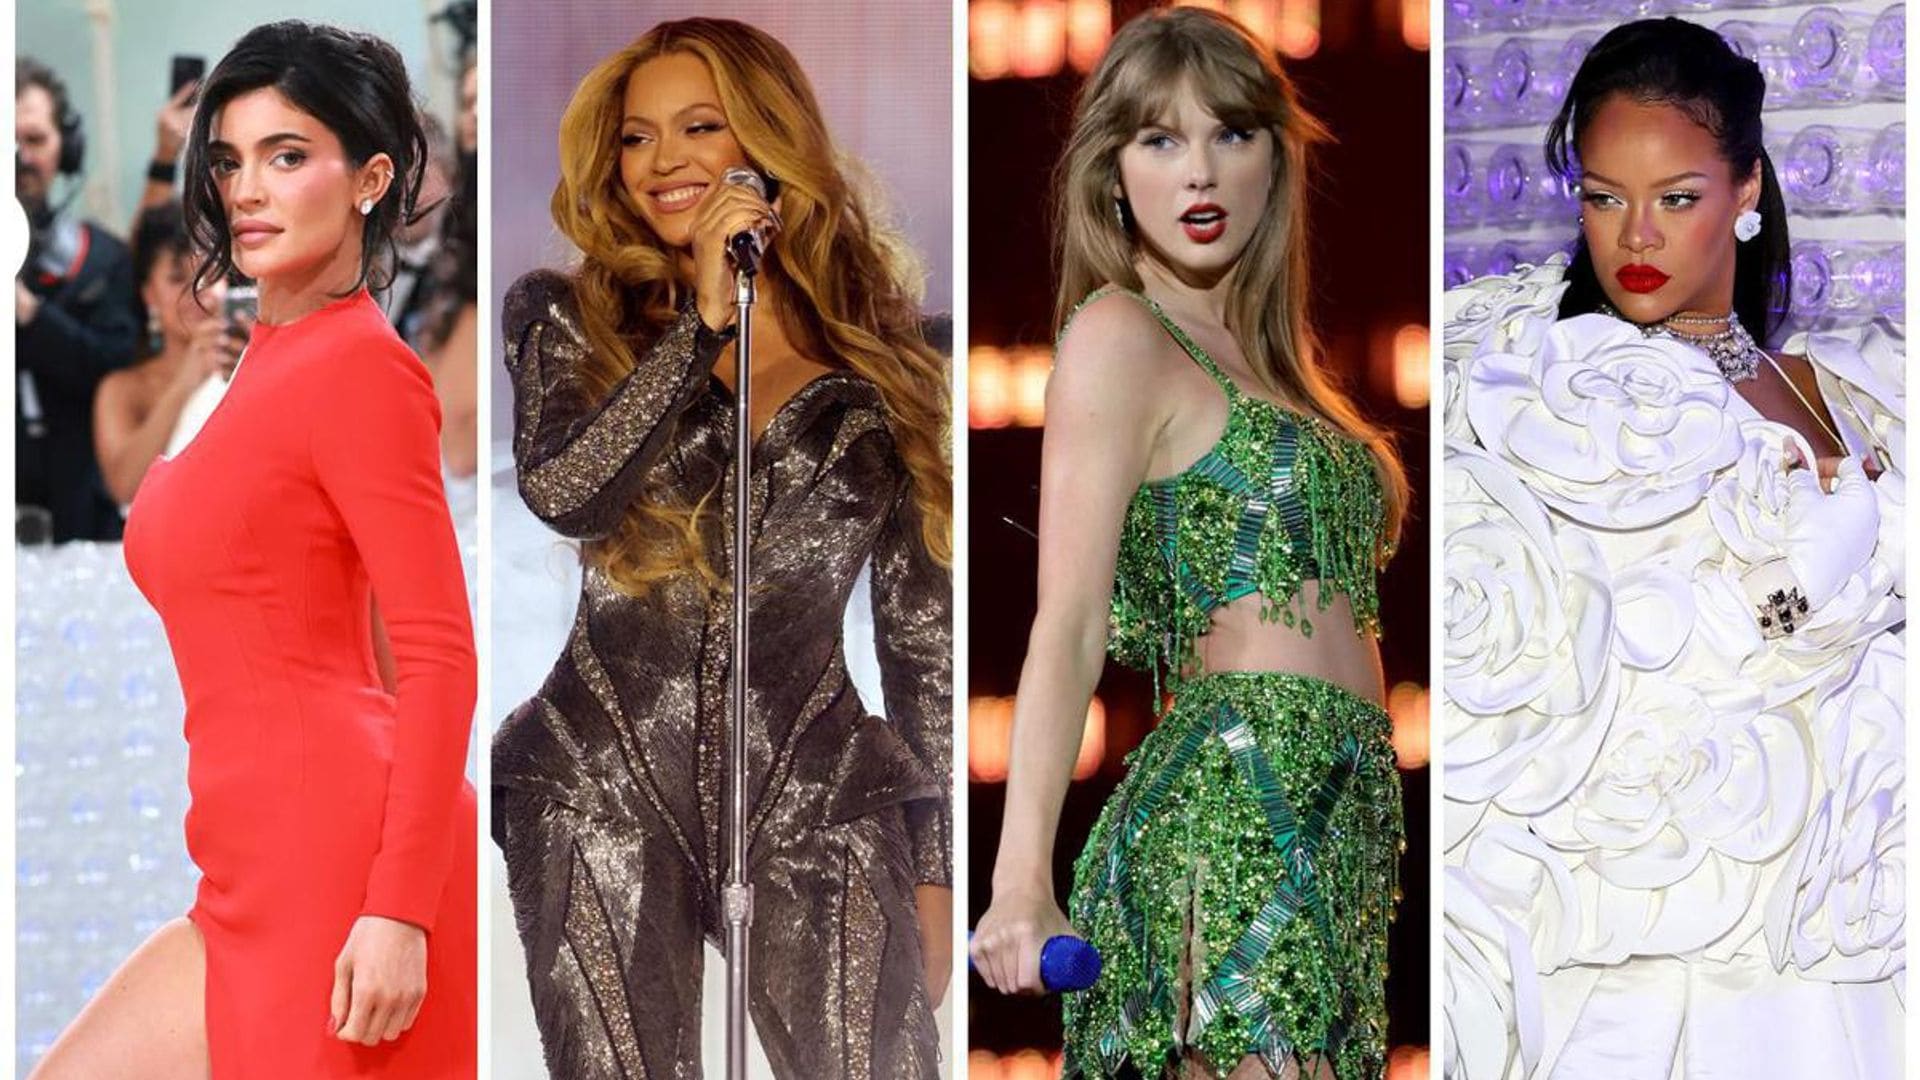 The 15 richest women celebrities: From Kim Kardashian to Taylor Swift and Serena Williams